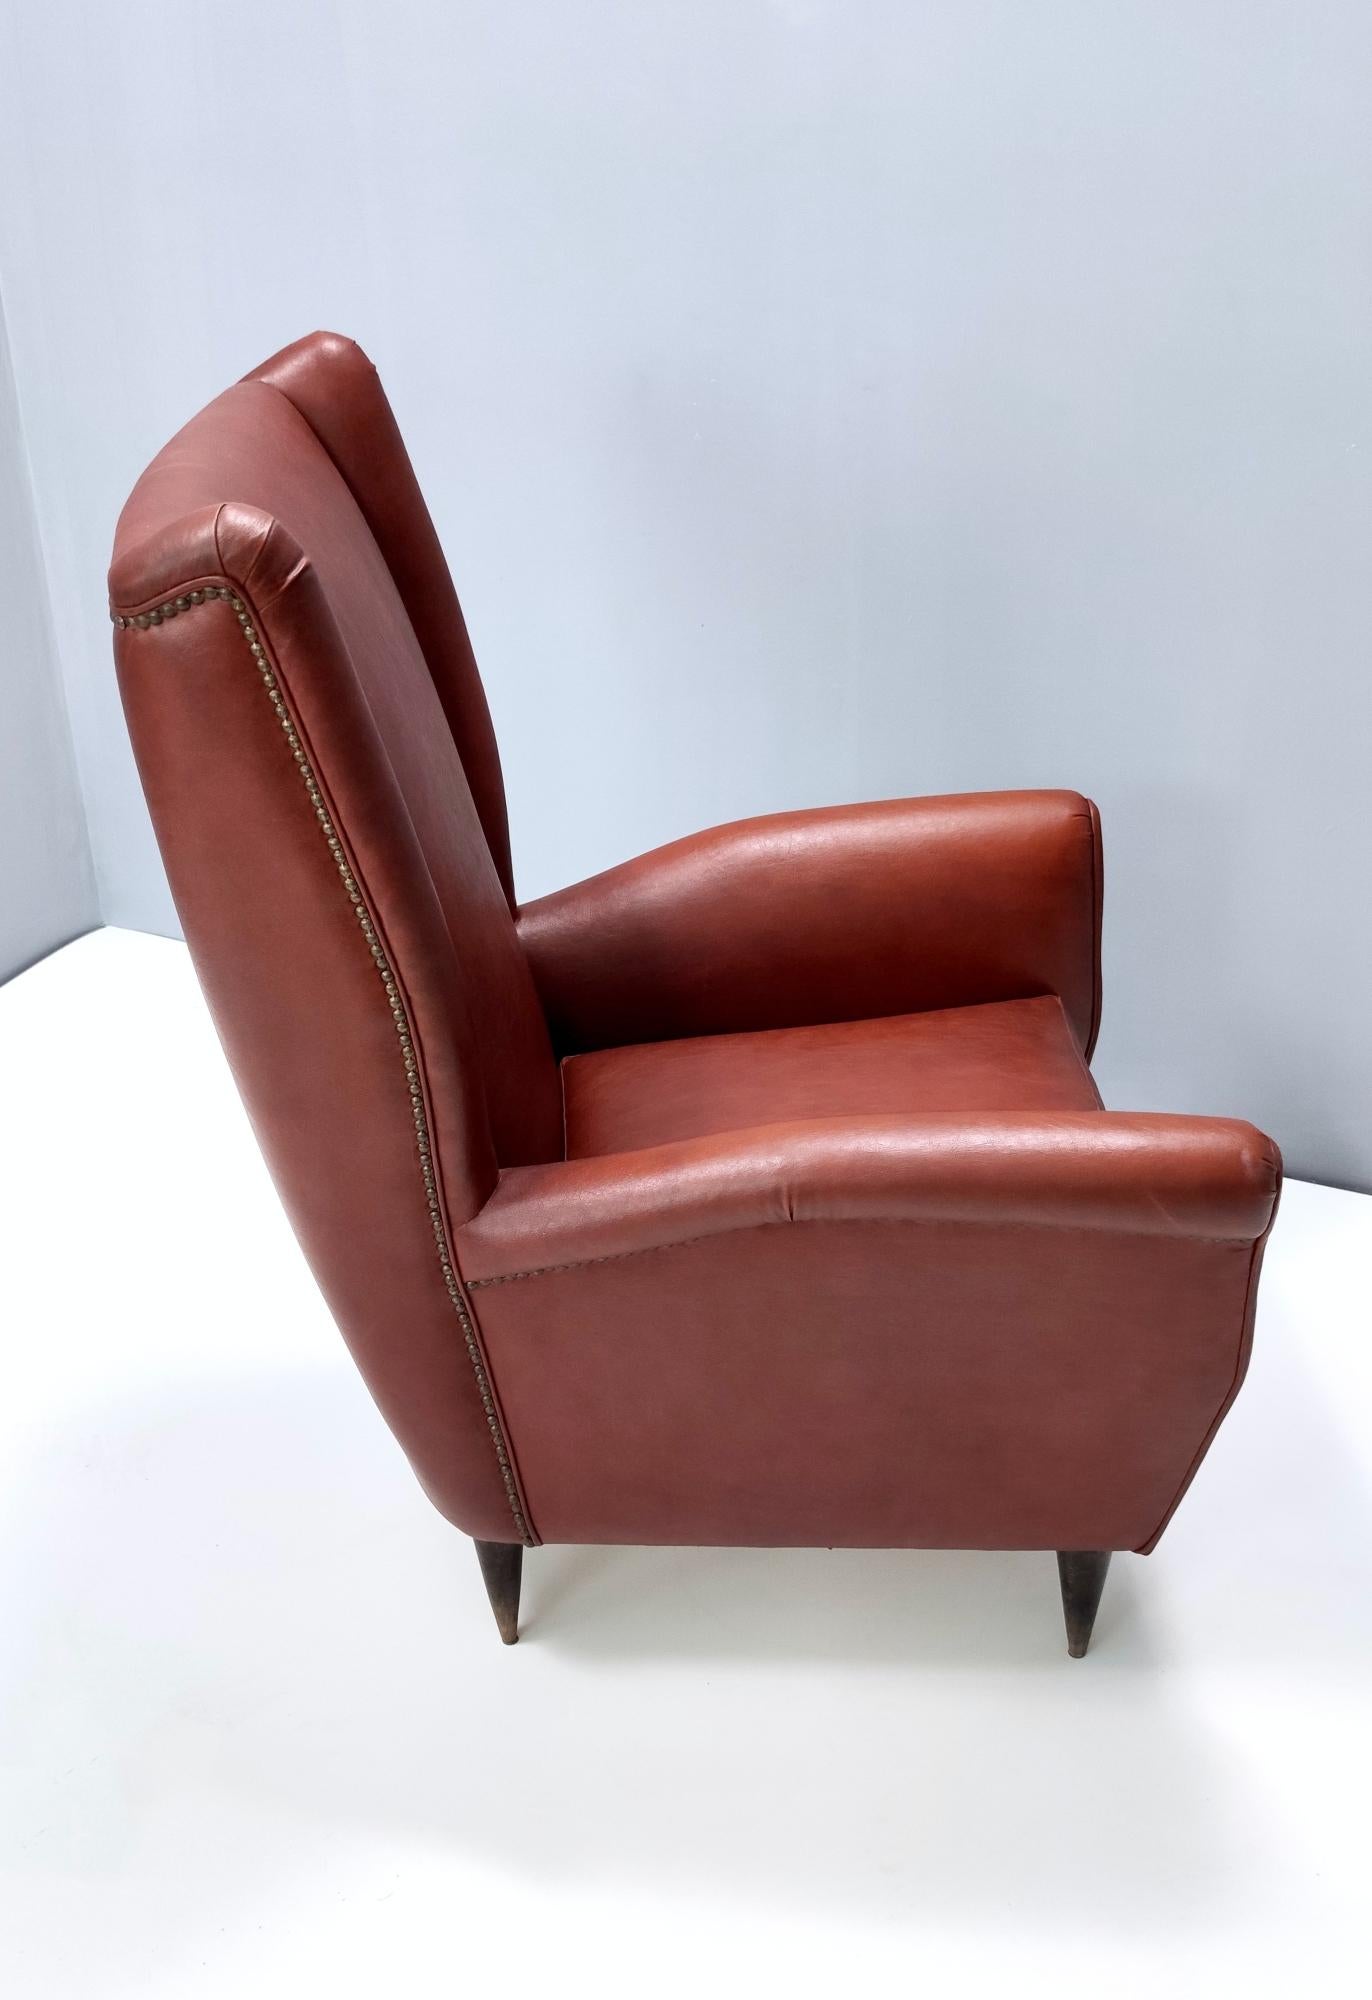 Faux Leather Skai Wingback Armchair Ascribable to Mod. 512 attr. to Gio Ponti Produced by ISA For Sale